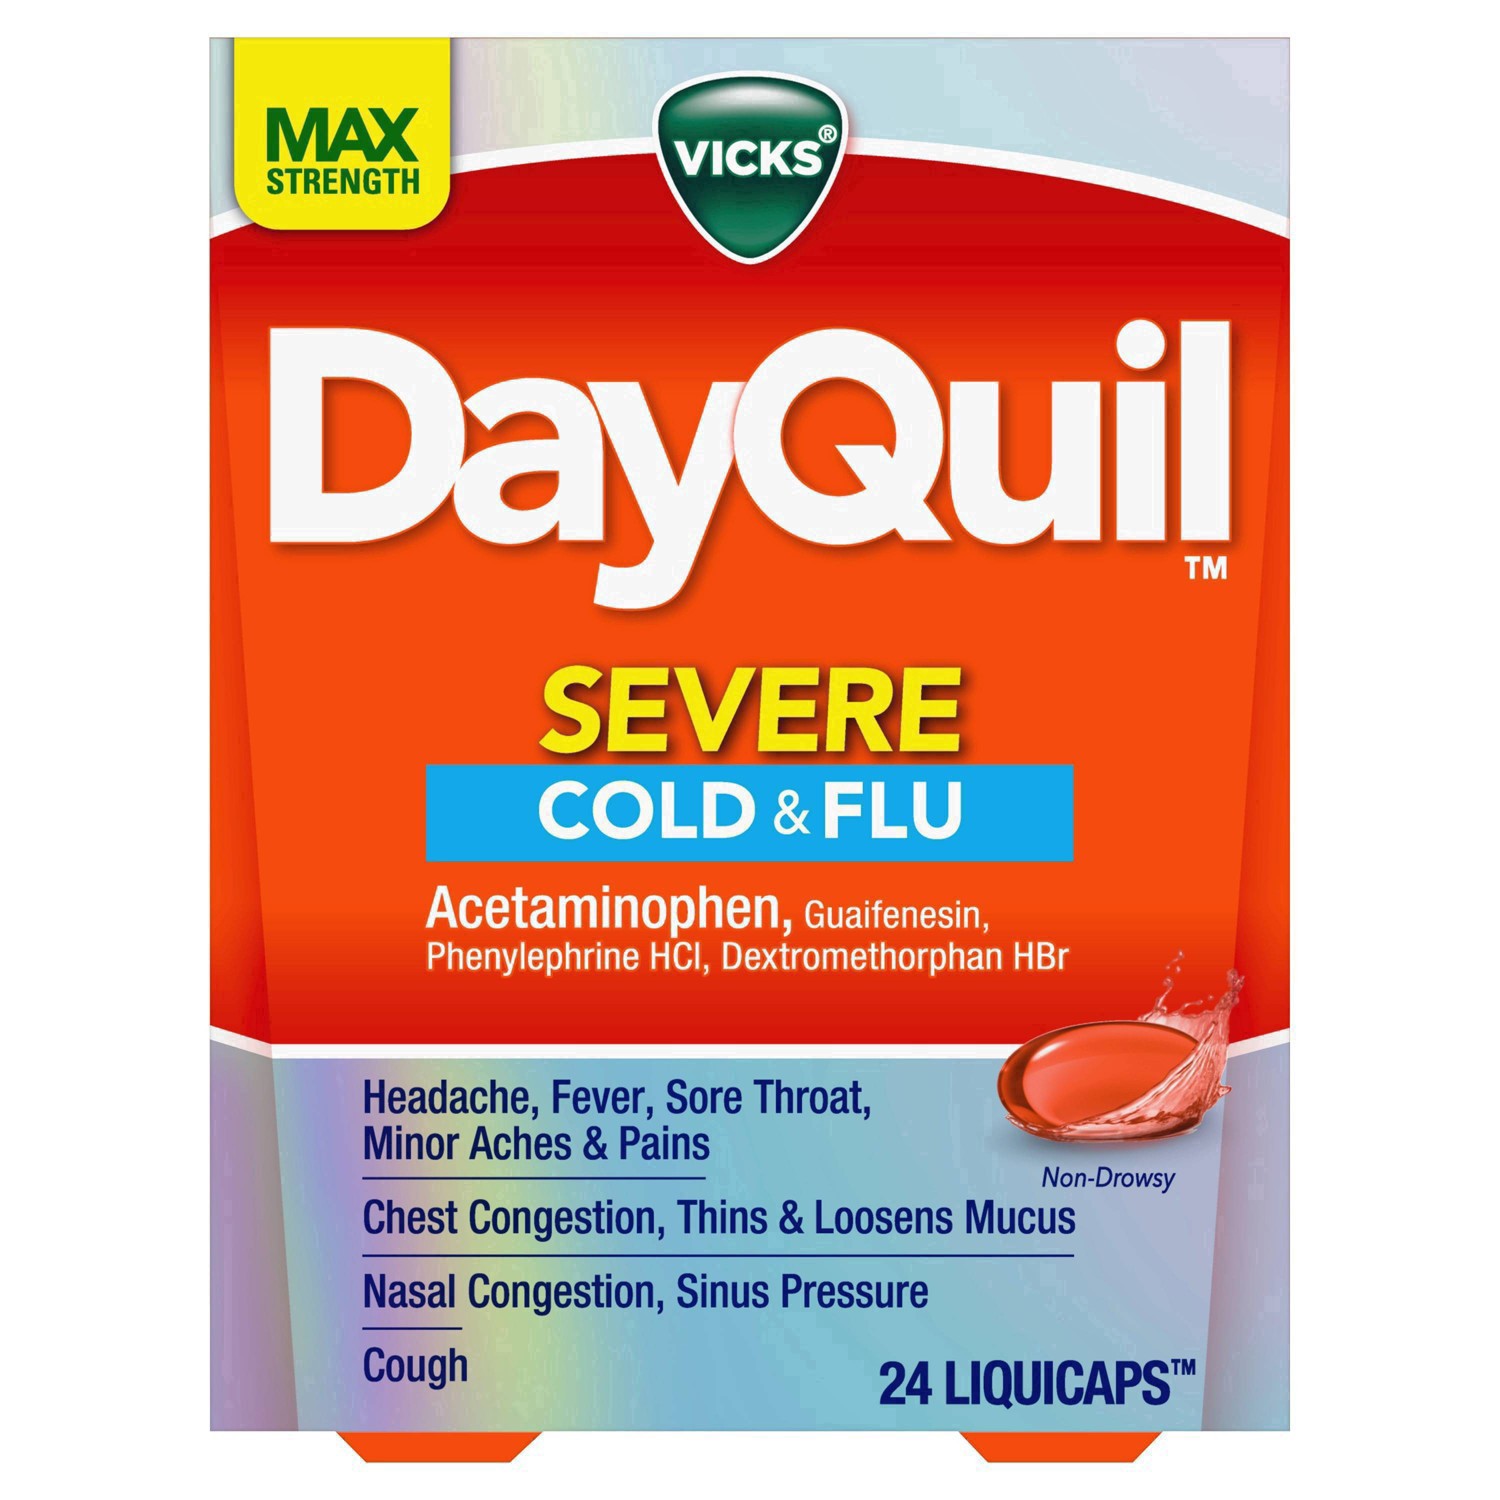 slide 24 of 46, Vicks DayQuil SEVERE Cold & Flu Medicine, Maximum Strength 9-Symptom Non-Drowsy Daytime Relief for Headache, Fever, Sore Throat, Minor Aches and Pains, Chest Congestion, Stuffy Nose, Nasal Congestion, Sinus Pressure, and Cough, 24 Liquicaps, 24 ct